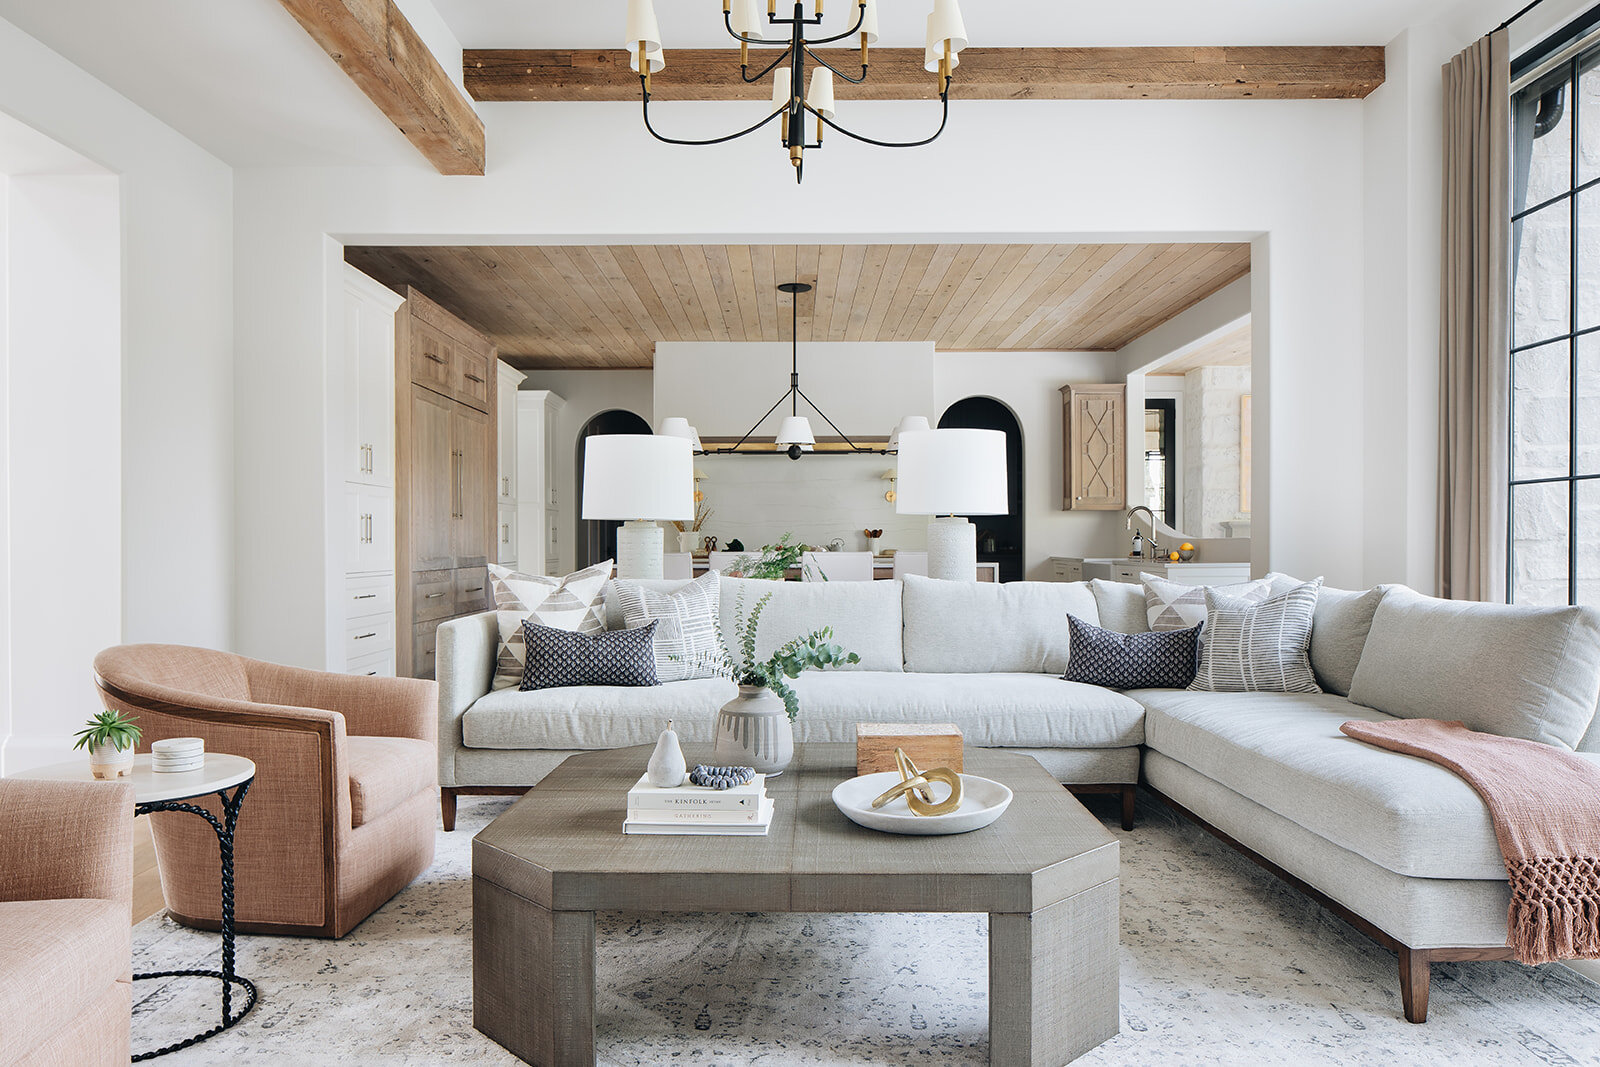 A Dreamy Home Ripe with Incredible Design Details